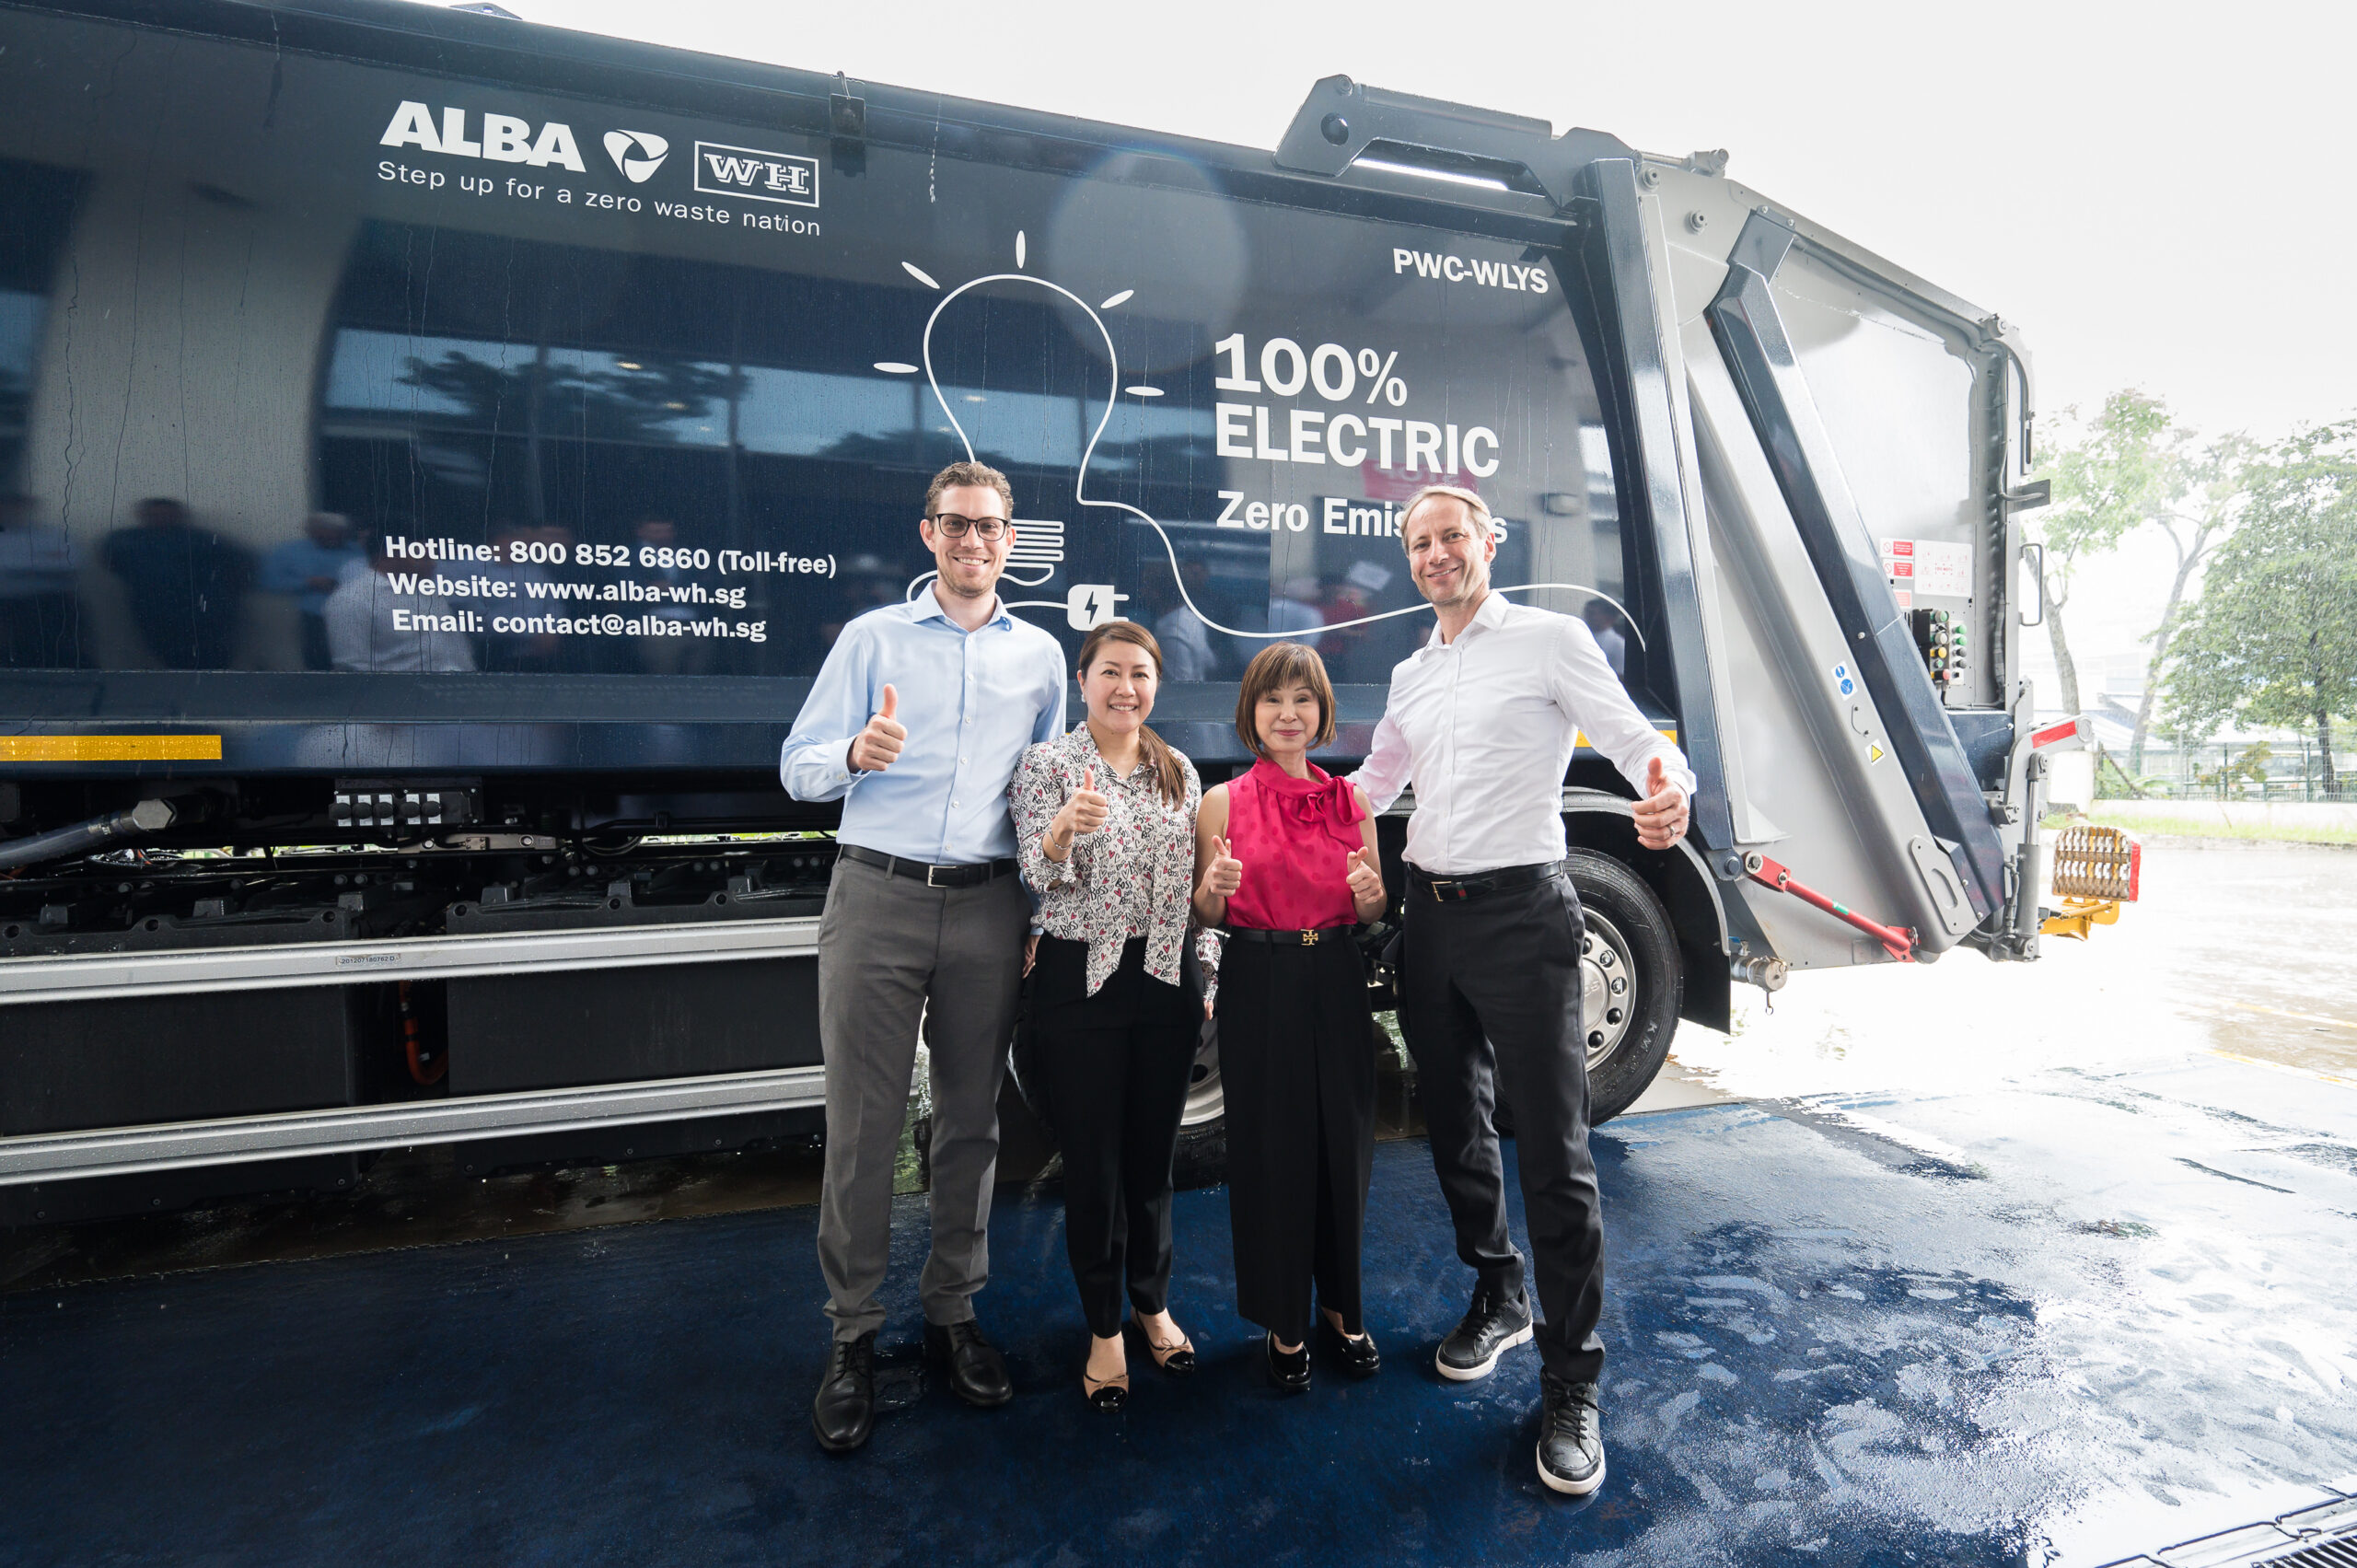 ALBA W&H launches the first european brand next generation fully electric vehicles for waste and recyclables collection in singapore